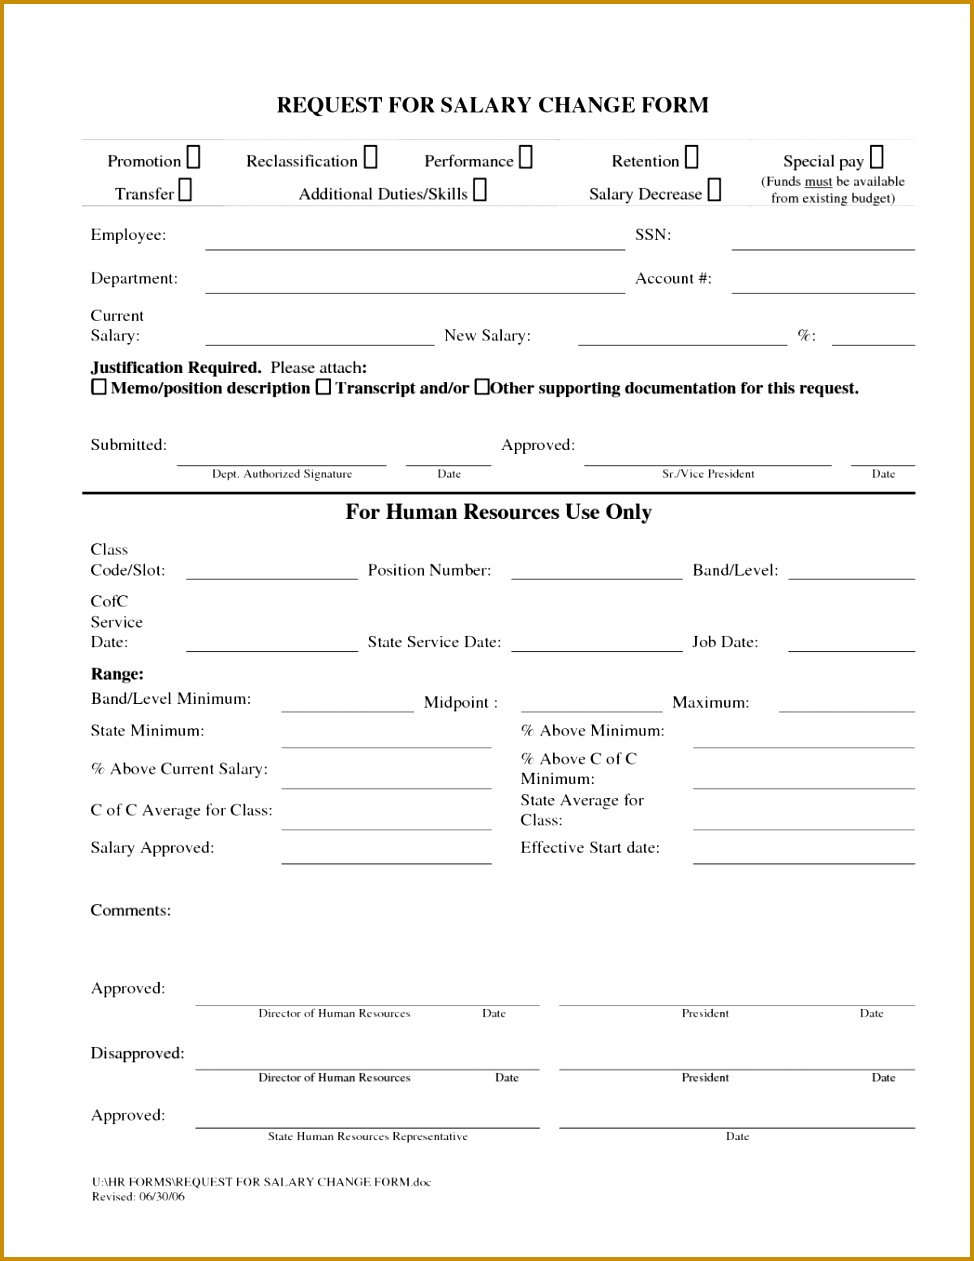 Request For Salary Change Form Sample Helloalive Excel Business Temp Change Request Form Form 1261974